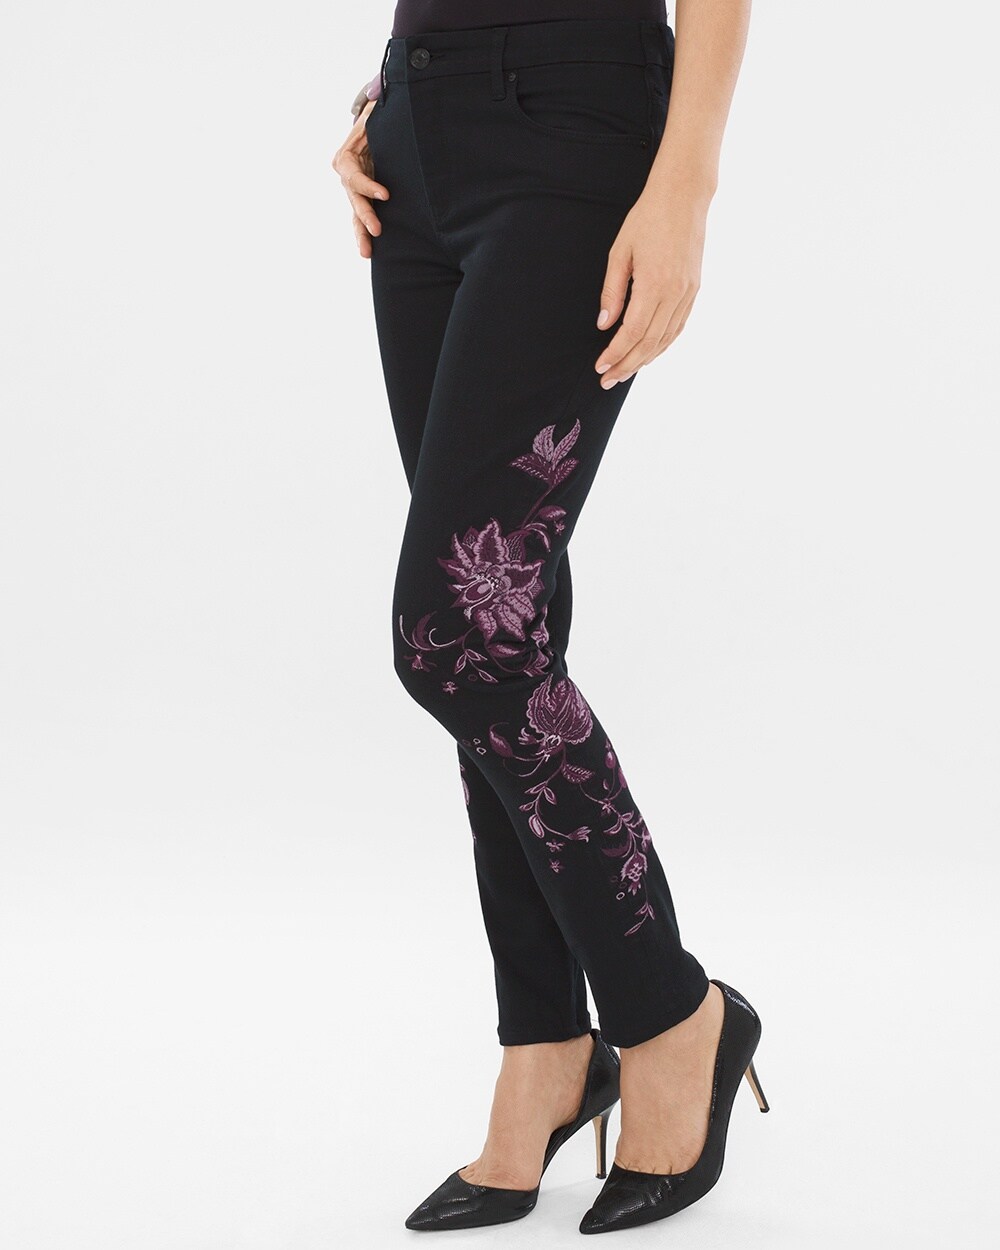 So Slimming Lavender-Embroidered Girlfriend Ankle Jeans